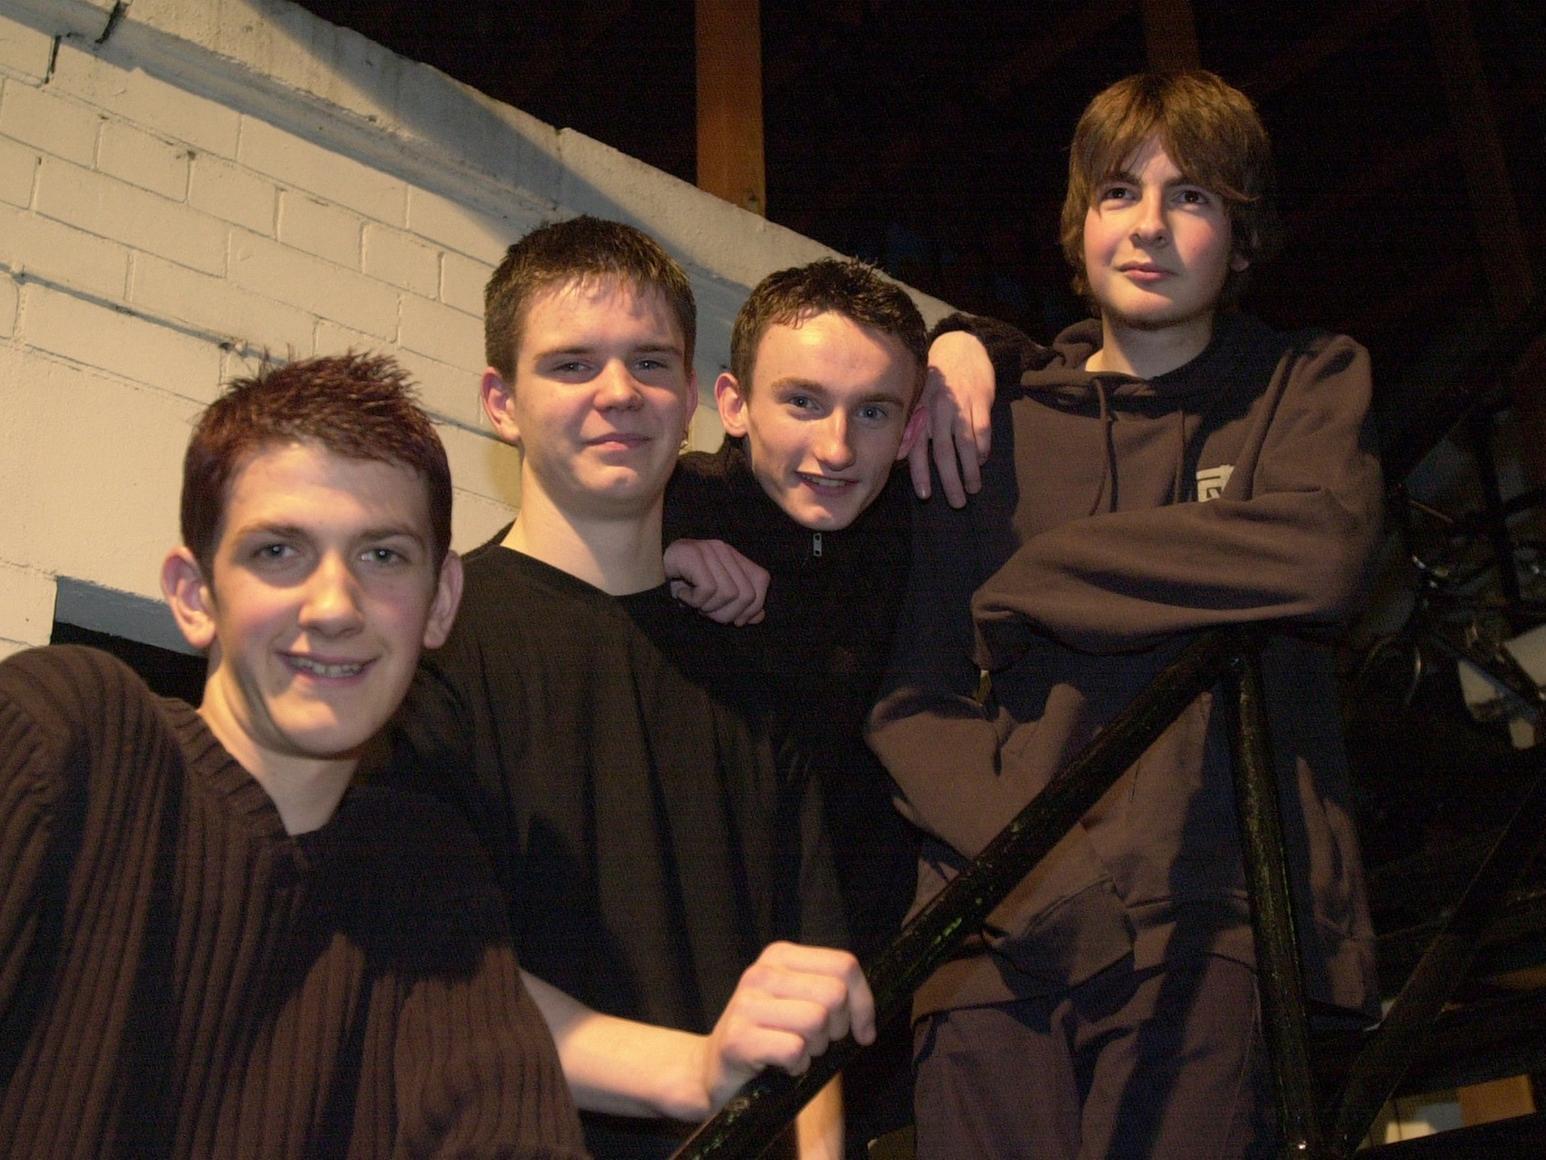 This band won the competition in 2000. They are, lft to right, Adam Nutter (lead guitarist), Stuart Coleman (bass), Robert Harvey (lead Singer) and Philip Jordan (drummer)